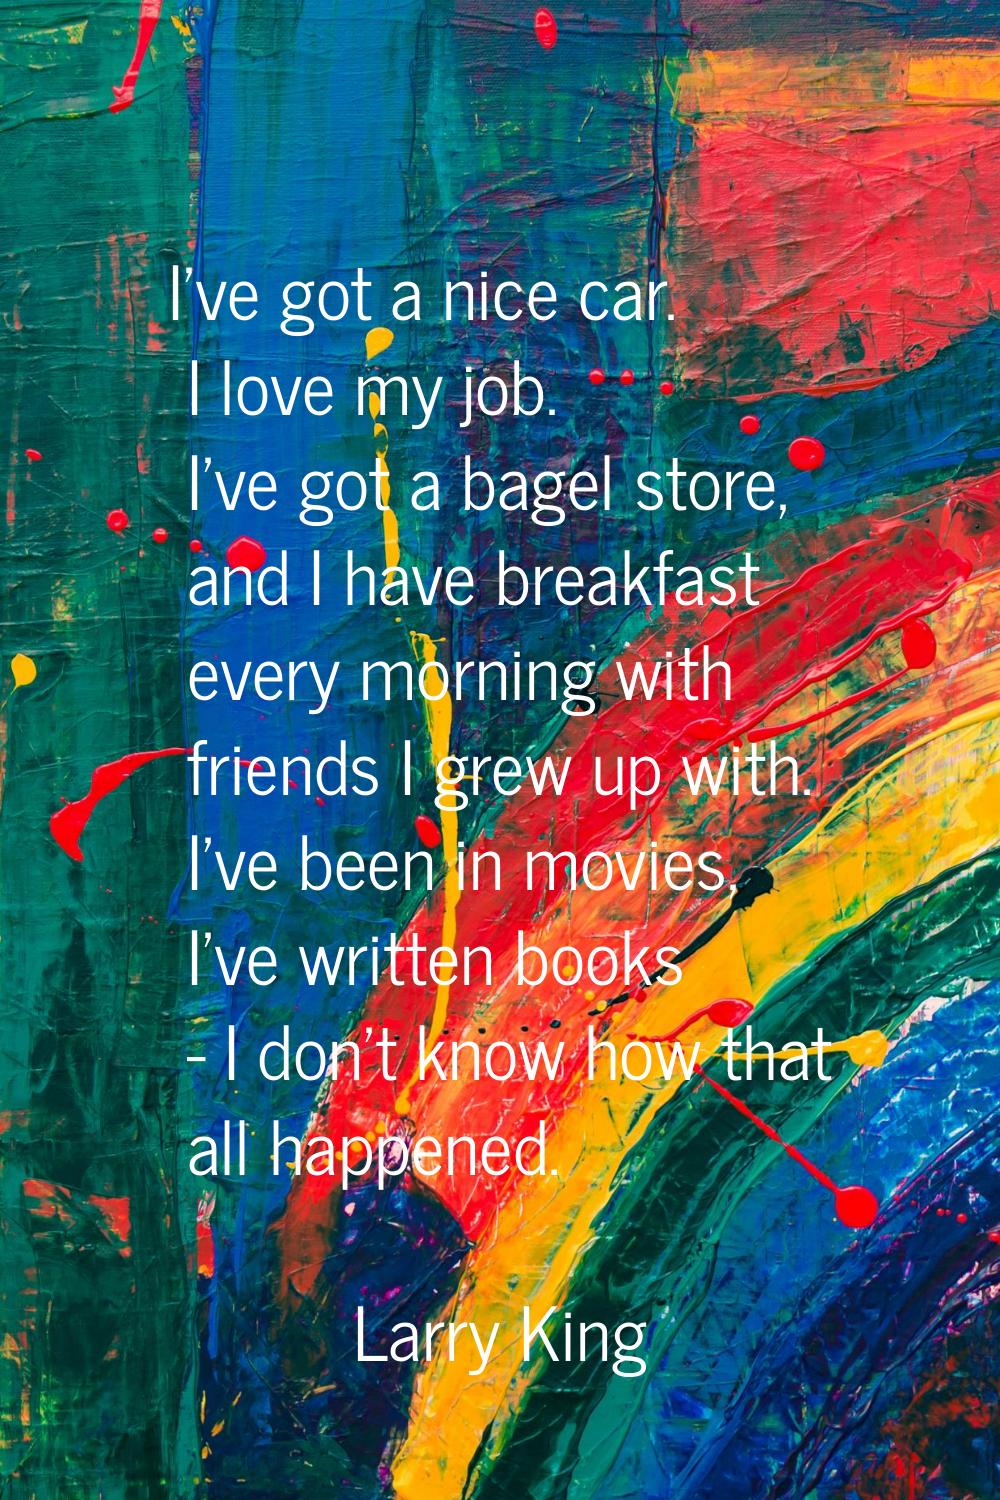 I've got a nice car. I love my job. I've got a bagel store, and I have breakfast every morning with